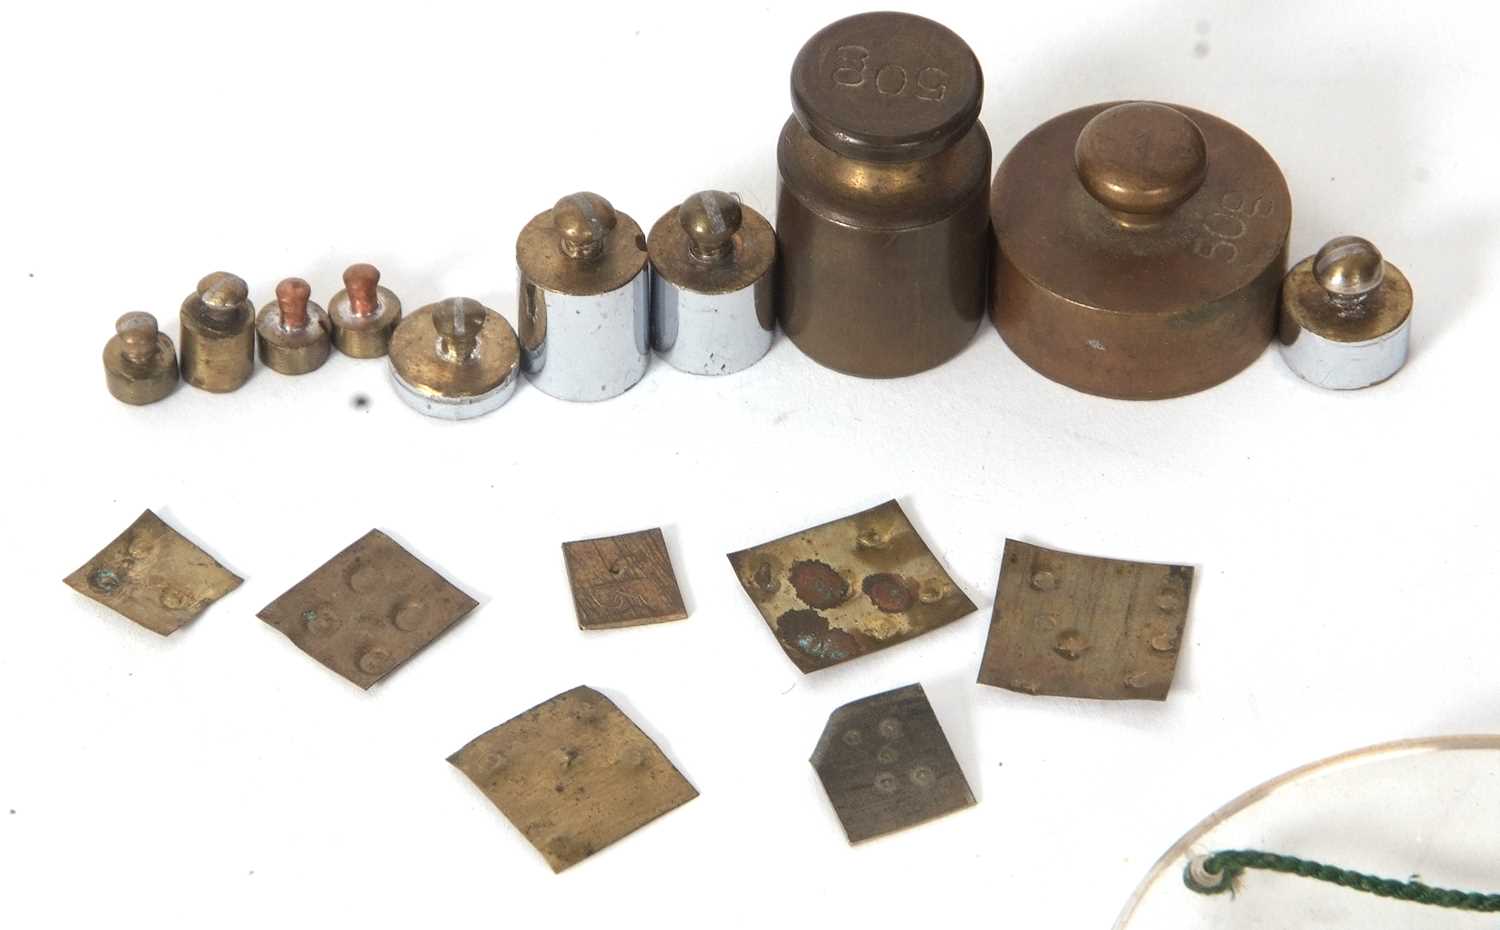 Box set of apothecary scales with glass pans, strings and weights and balance beams - Image 2 of 4